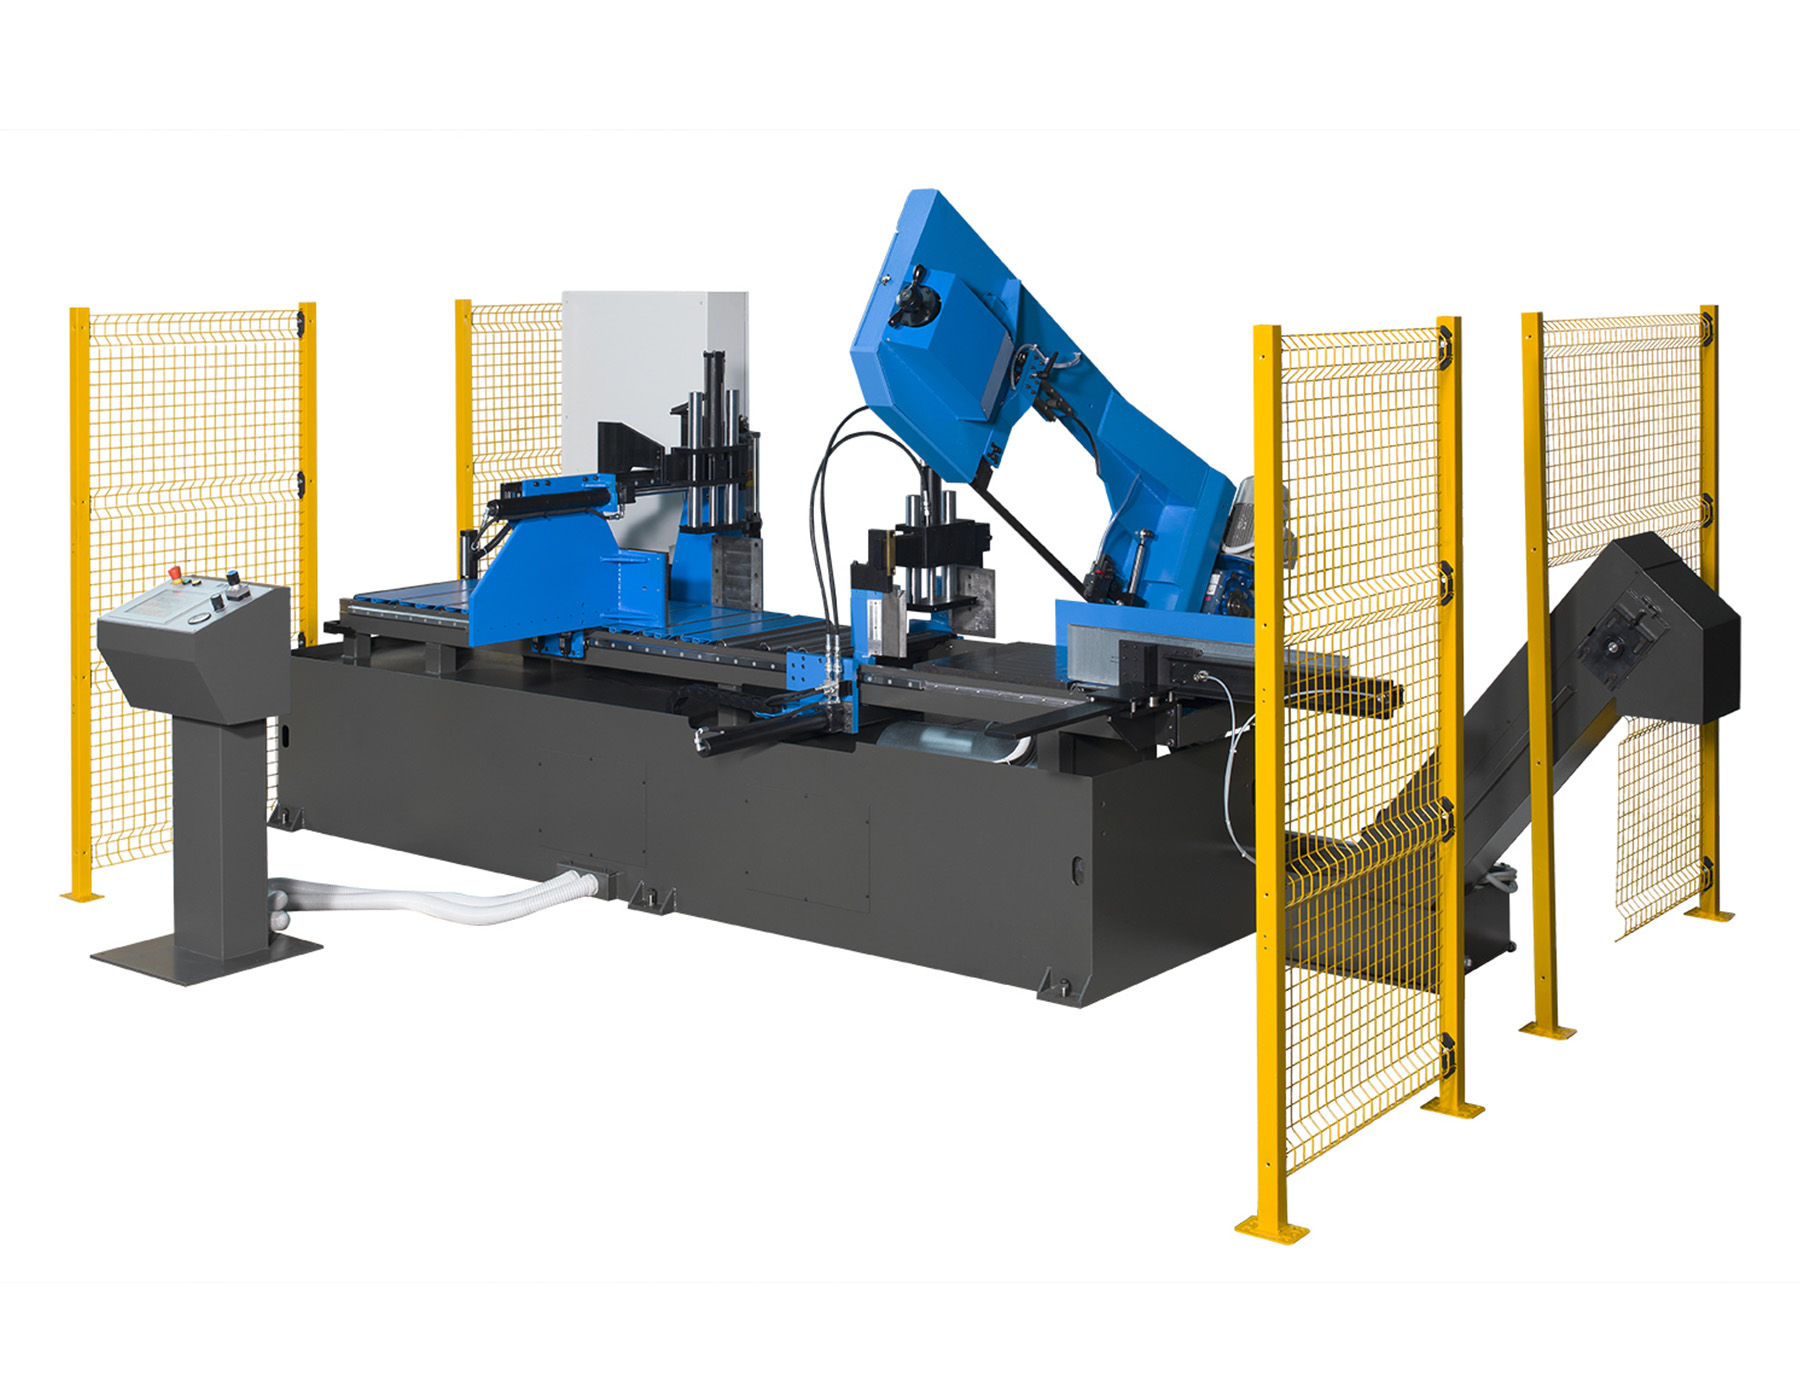 Automatic Pivoting left/right cut bandsaw